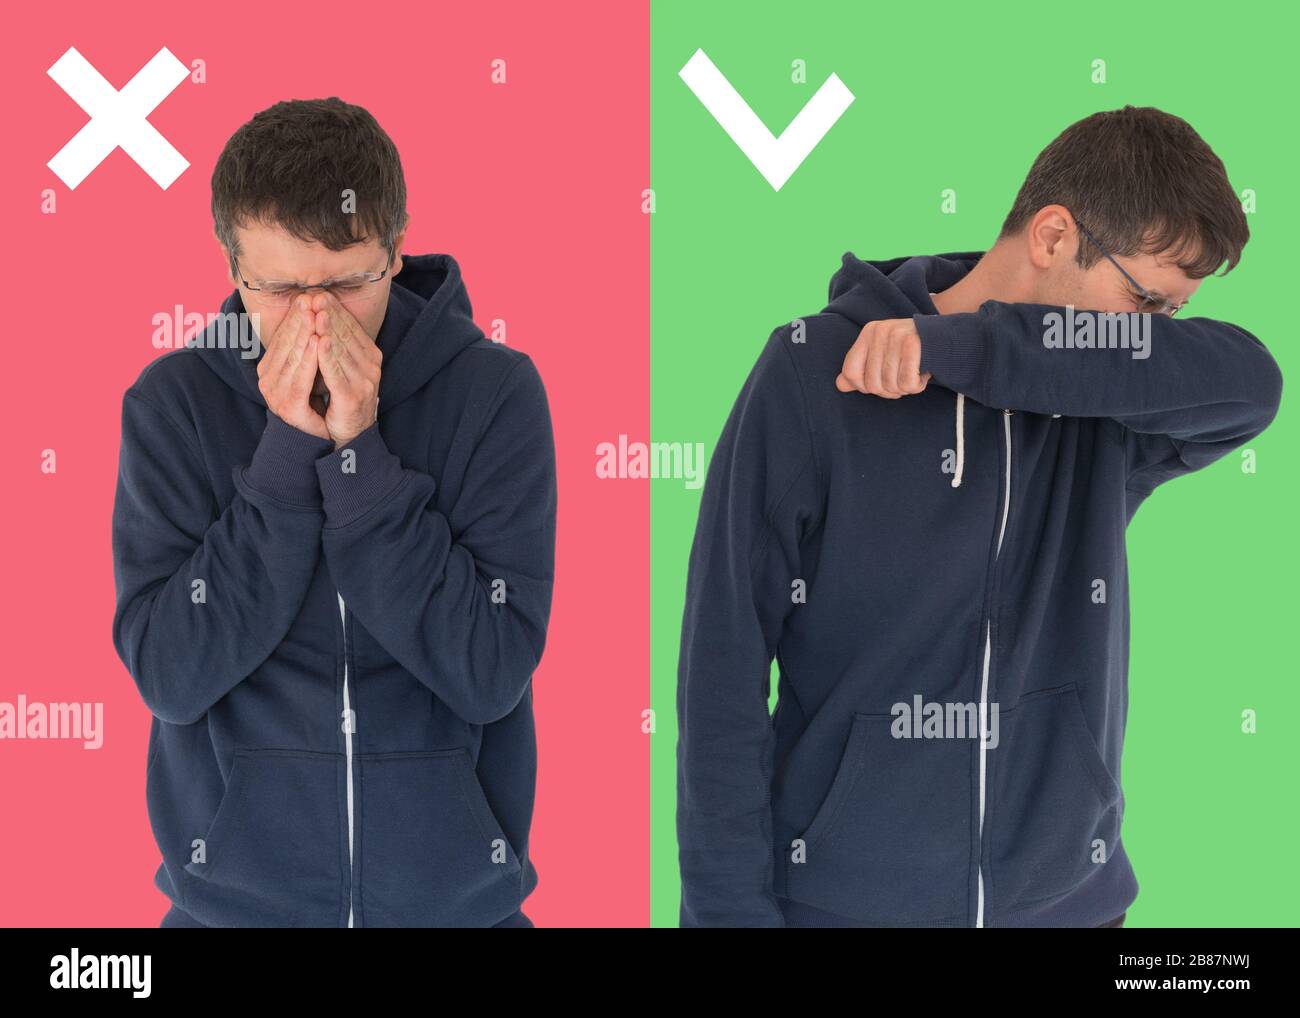 Comparison between wrong and right way to sneeze to prevent virus infection. Caucasian man isolated on colored background sneezing,coughing into her a Stock Photo